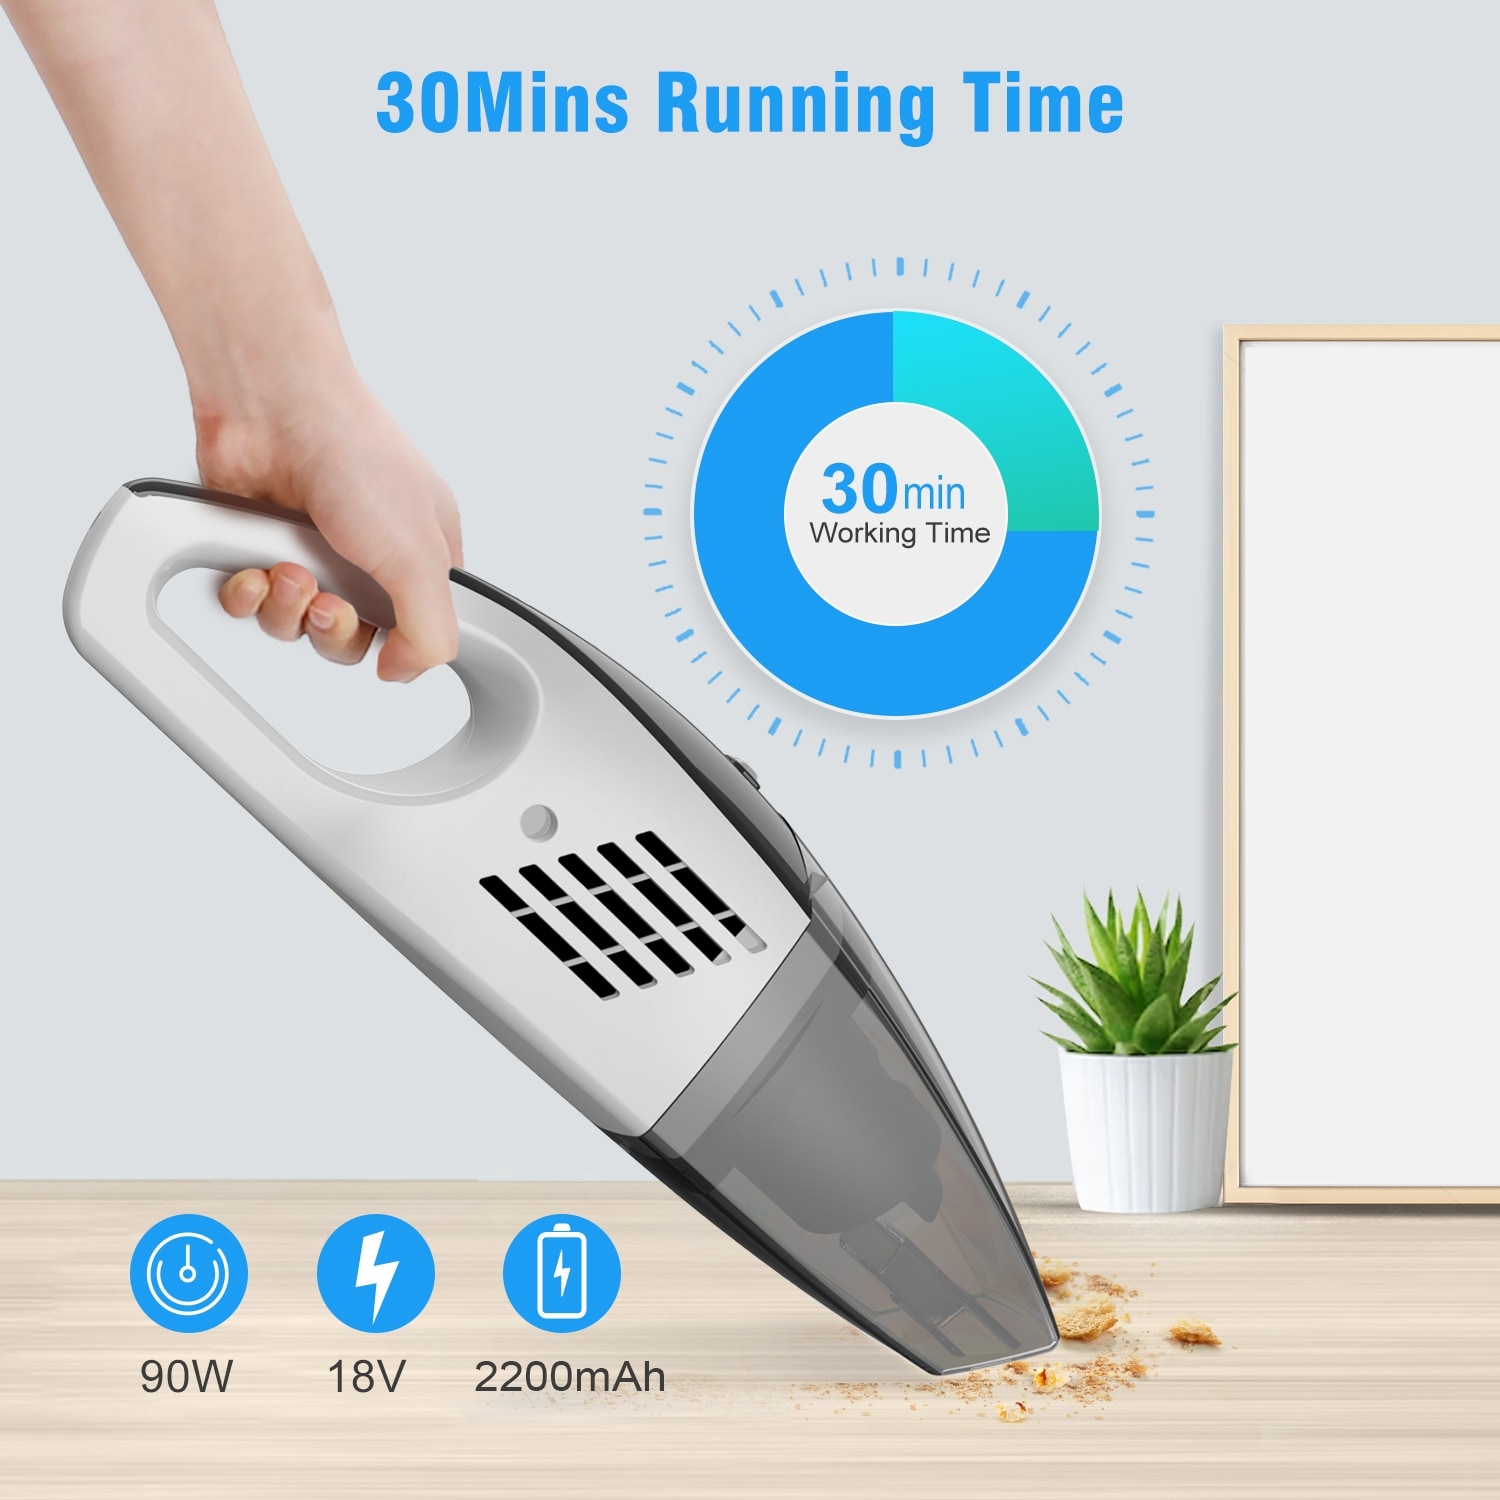 https://ak1.ostkcdn.com/images/products/is/images/direct/c2db8bf36de8e28afe6f00651ecb19dc786b7c98/ZIGLINT-Cordless-Handheld-Vacuum-Cleaner-9-KPa-Powerful-Suction-with-Lightweight-design.jpg